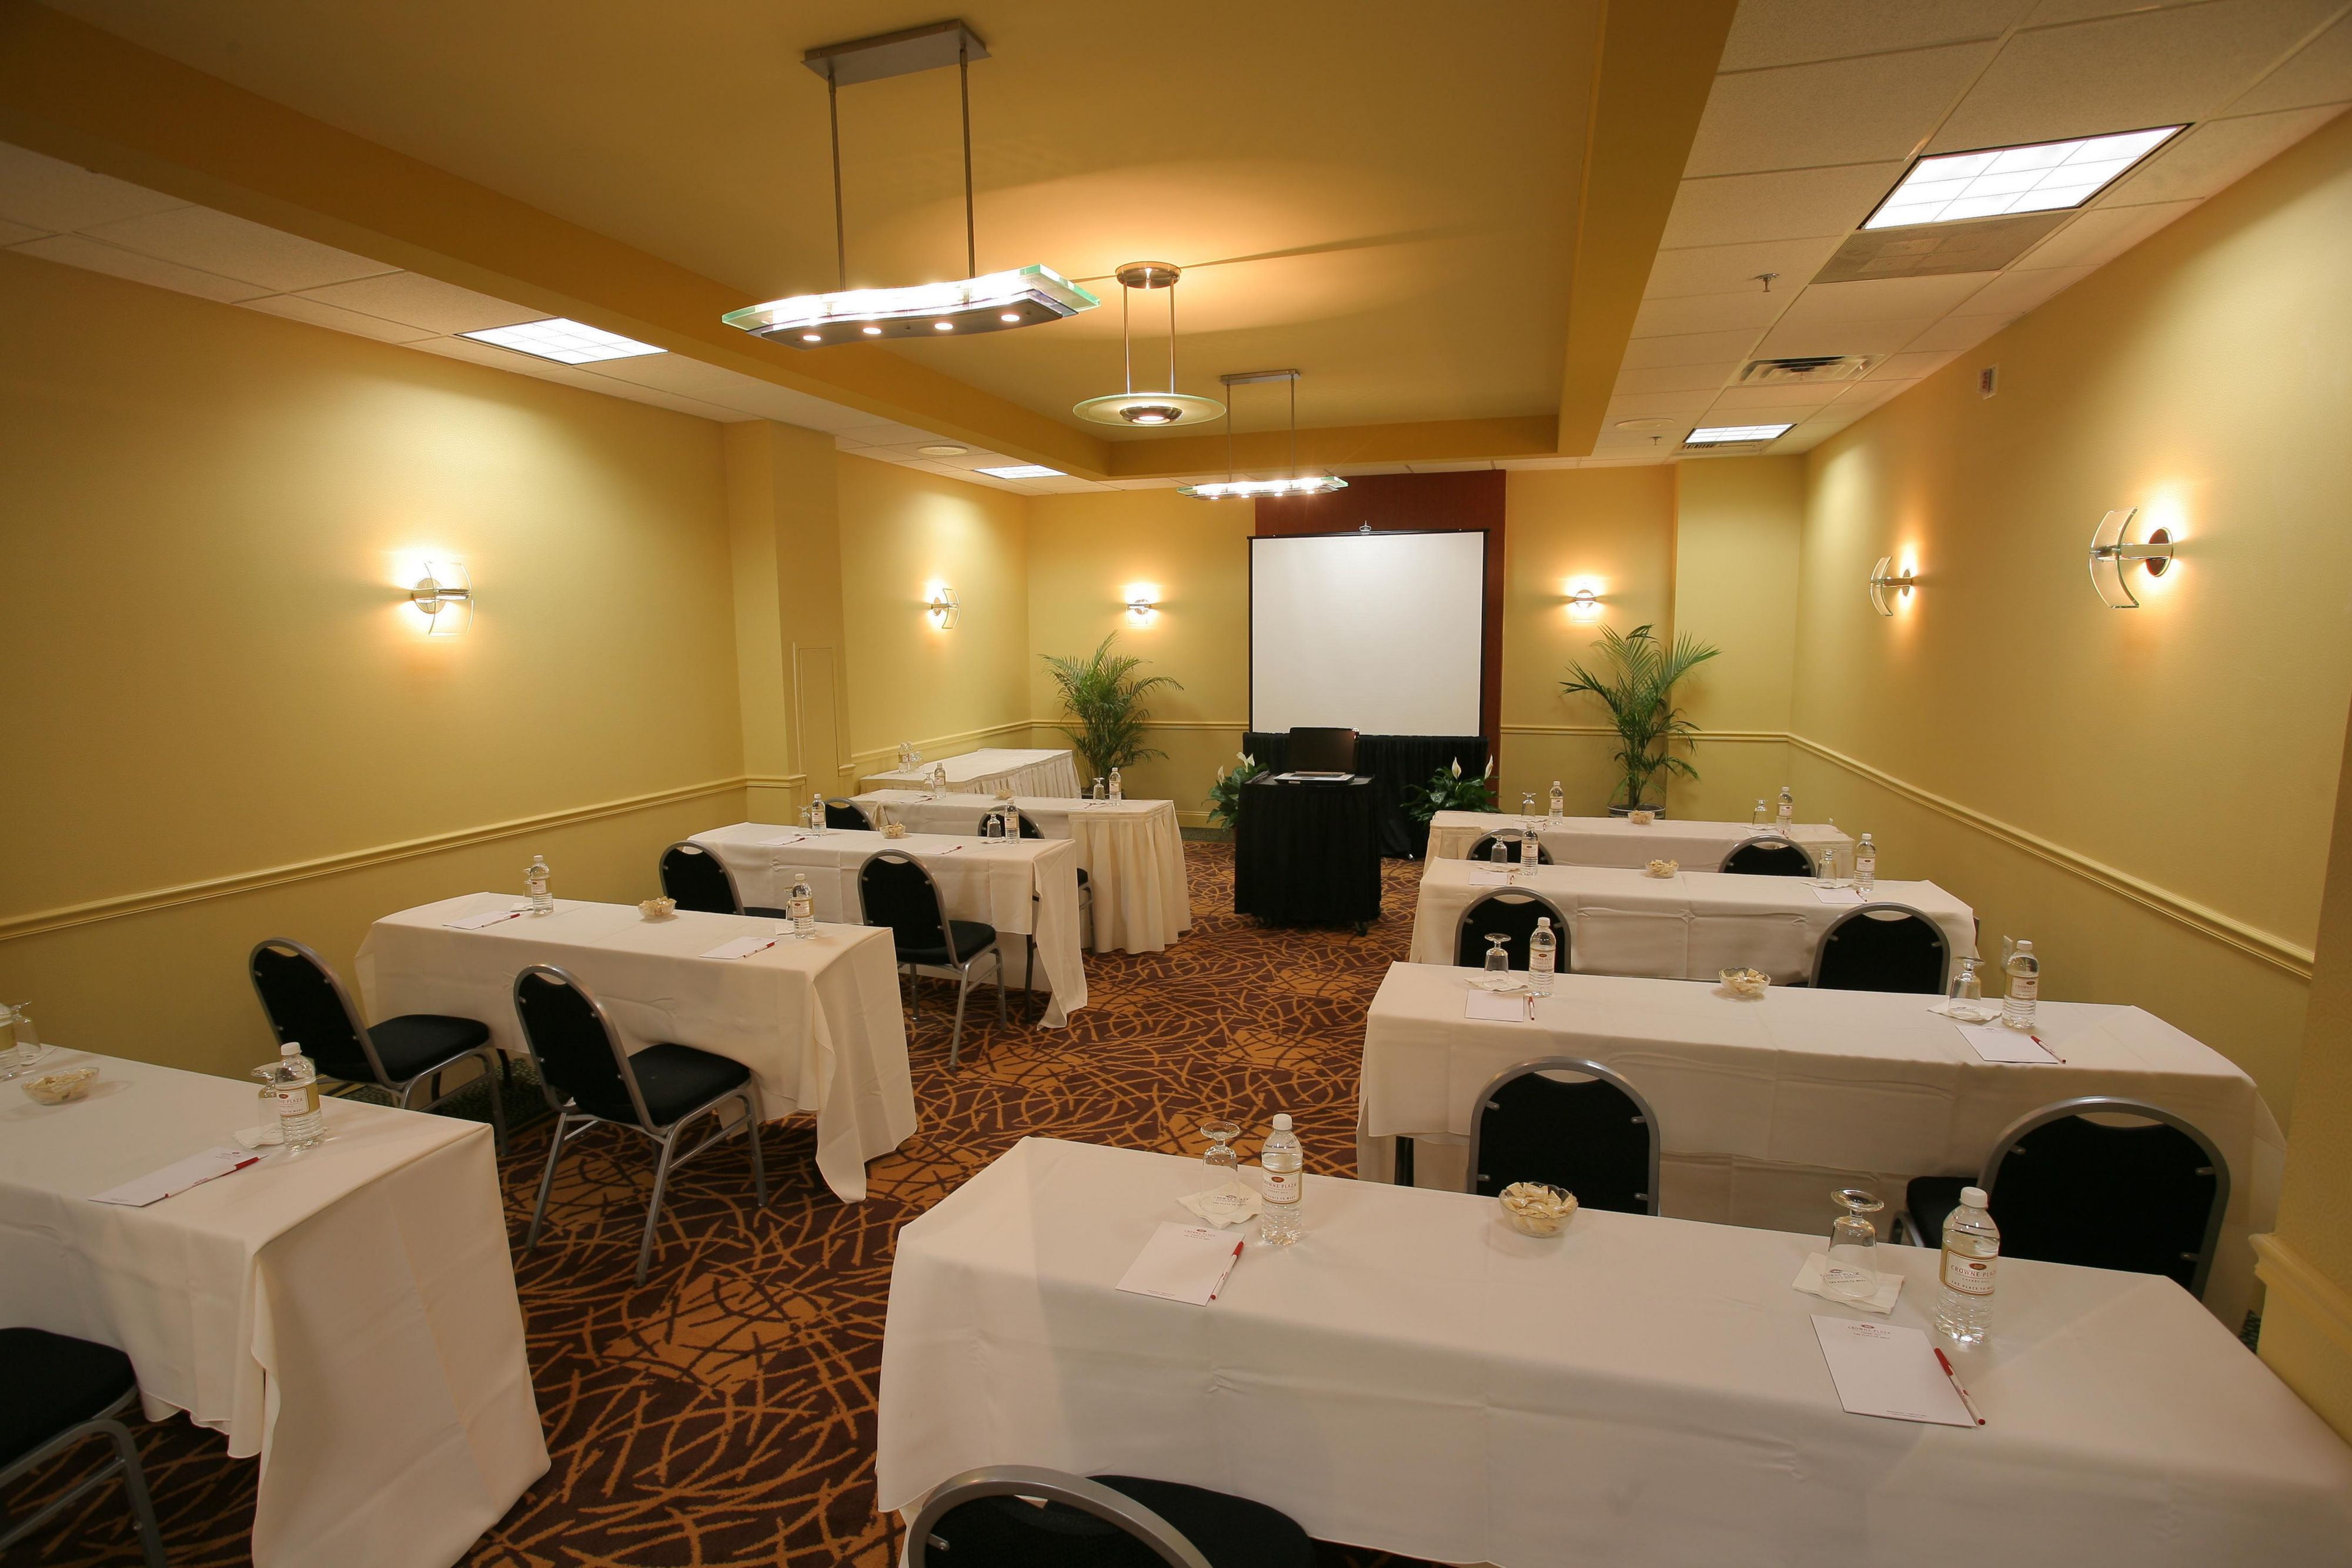 Break-out Room accommodating up to 30 guests classroom style